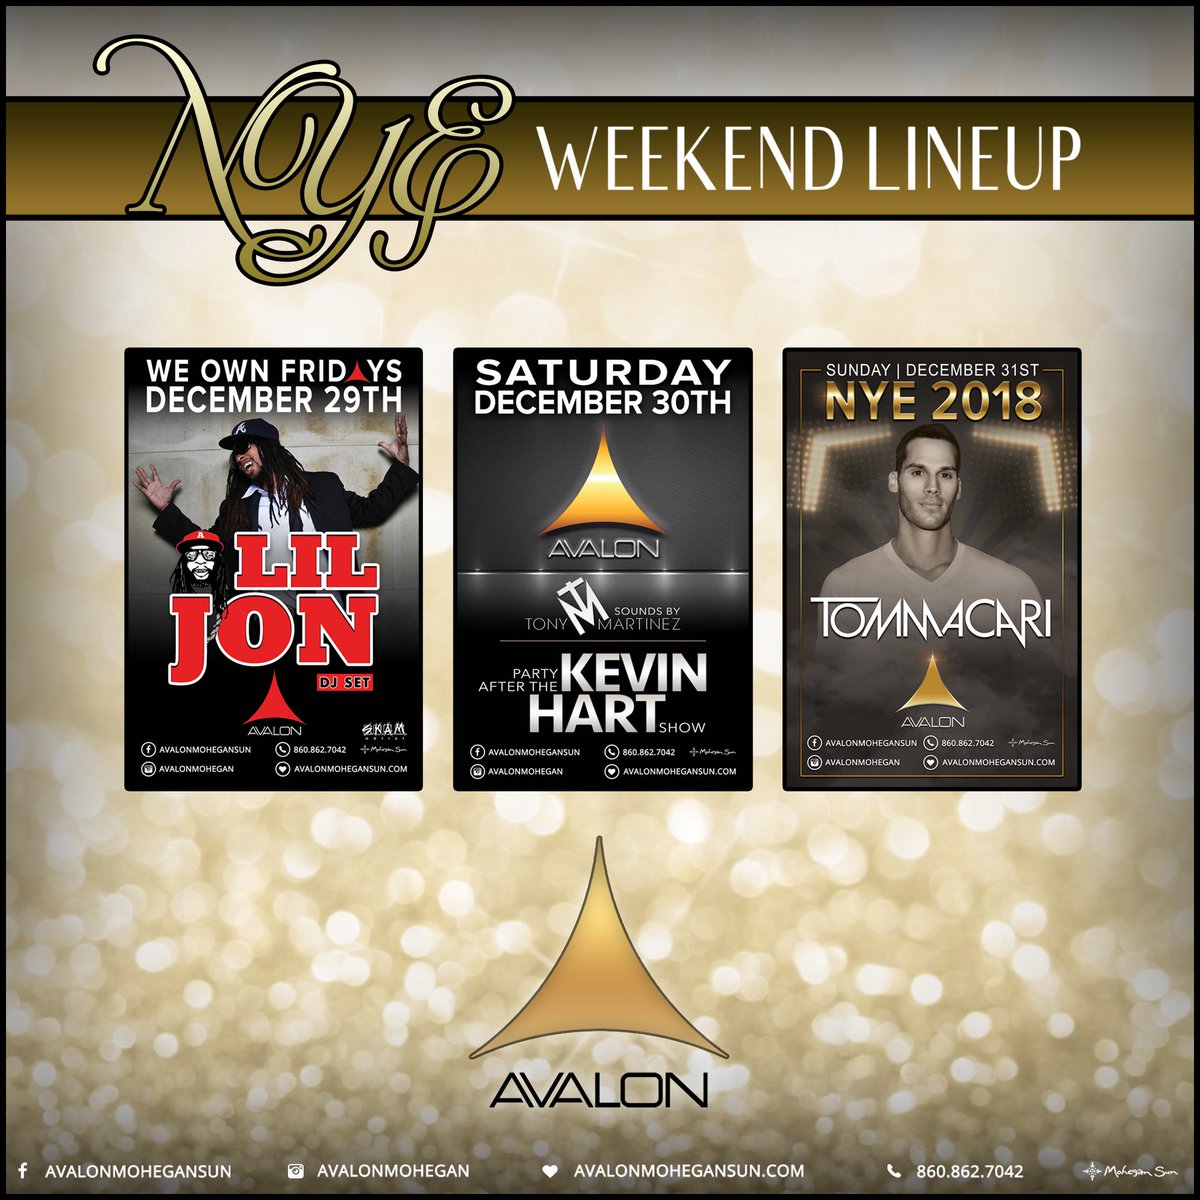 RT @AvalonMohegan: Weekend Lineup: @LilJon, Party After The @KevinHart4Real show, and #AvalonNYE with @DJTomMacari! https://t.co/ge3qLN1wi6